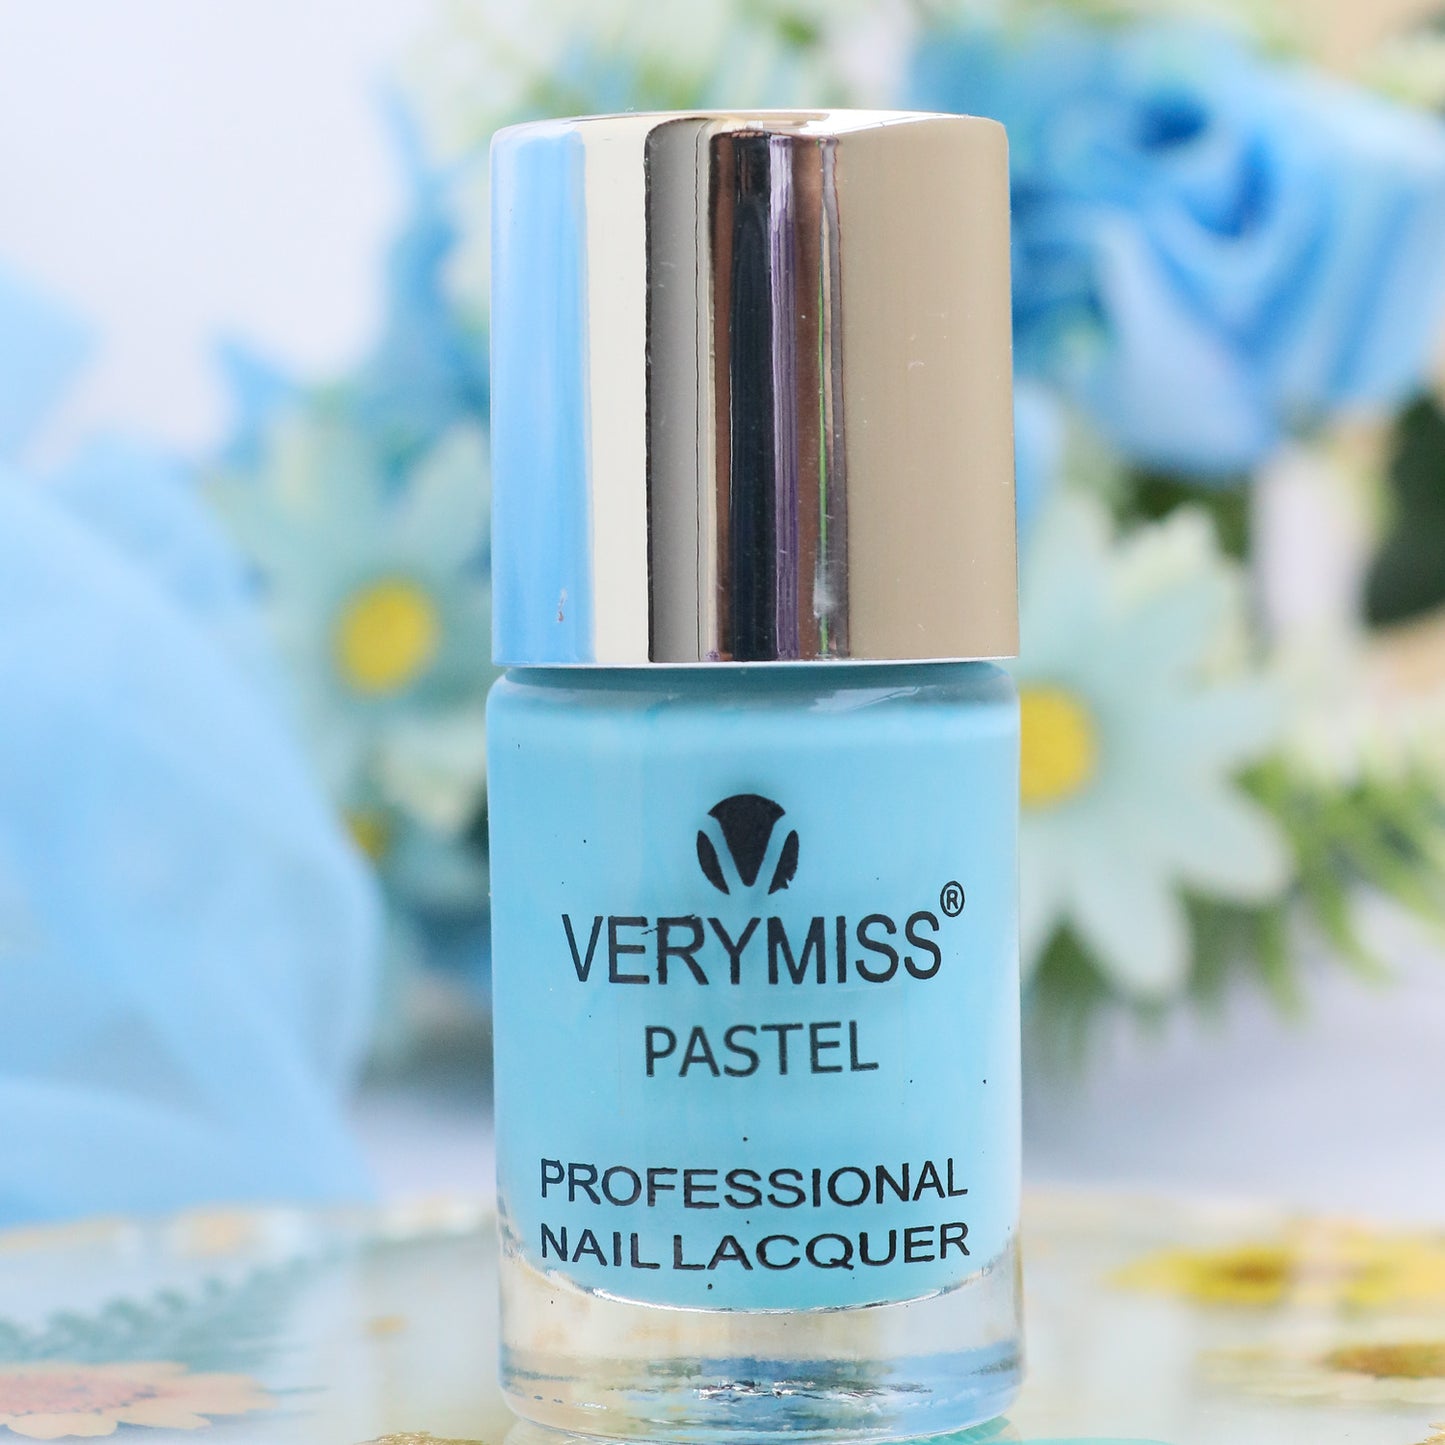 Professional Nail Lacquer - P306 Shining Blue